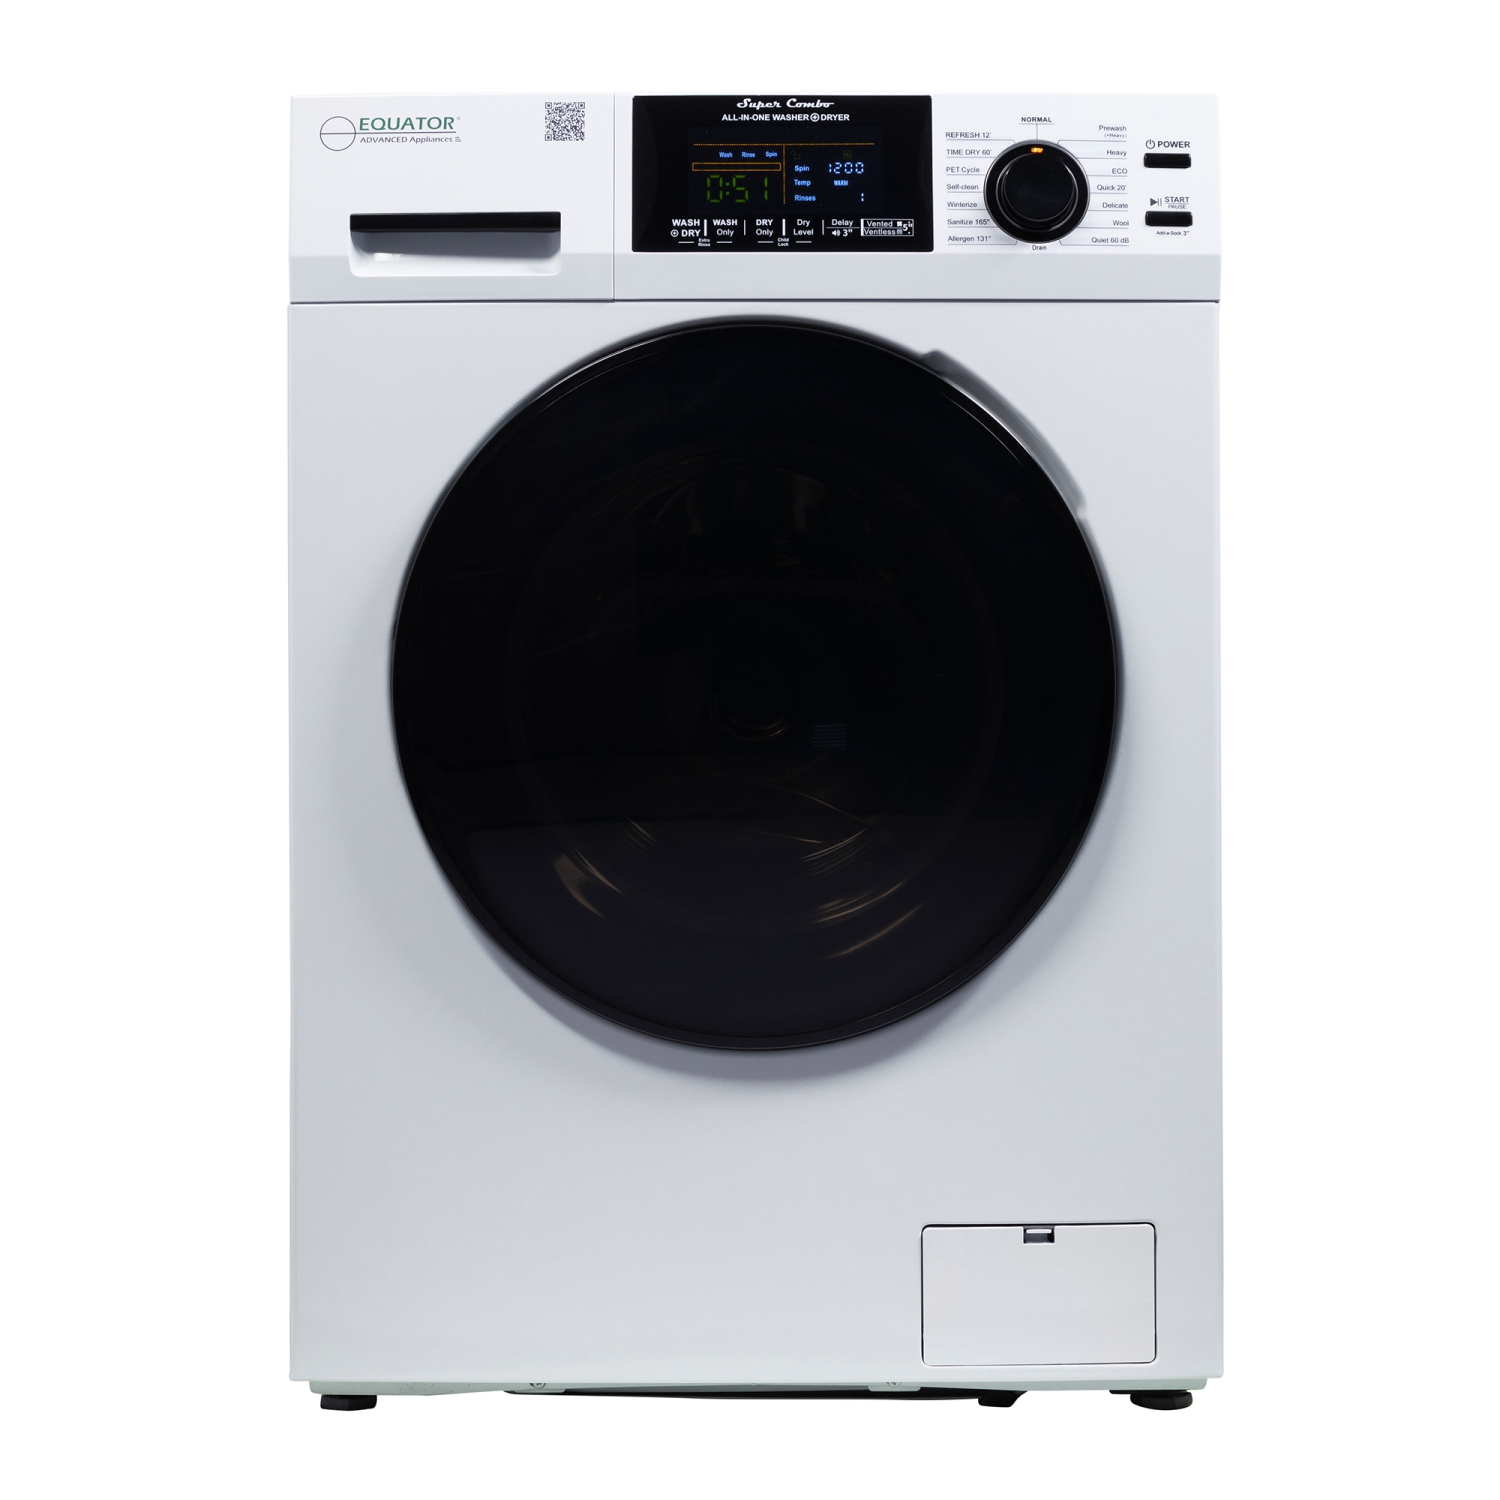 Equator All-in-One Washer Dryer VENTLESS/VENTED PET cycle 1.62cf/15lbs 110V in White